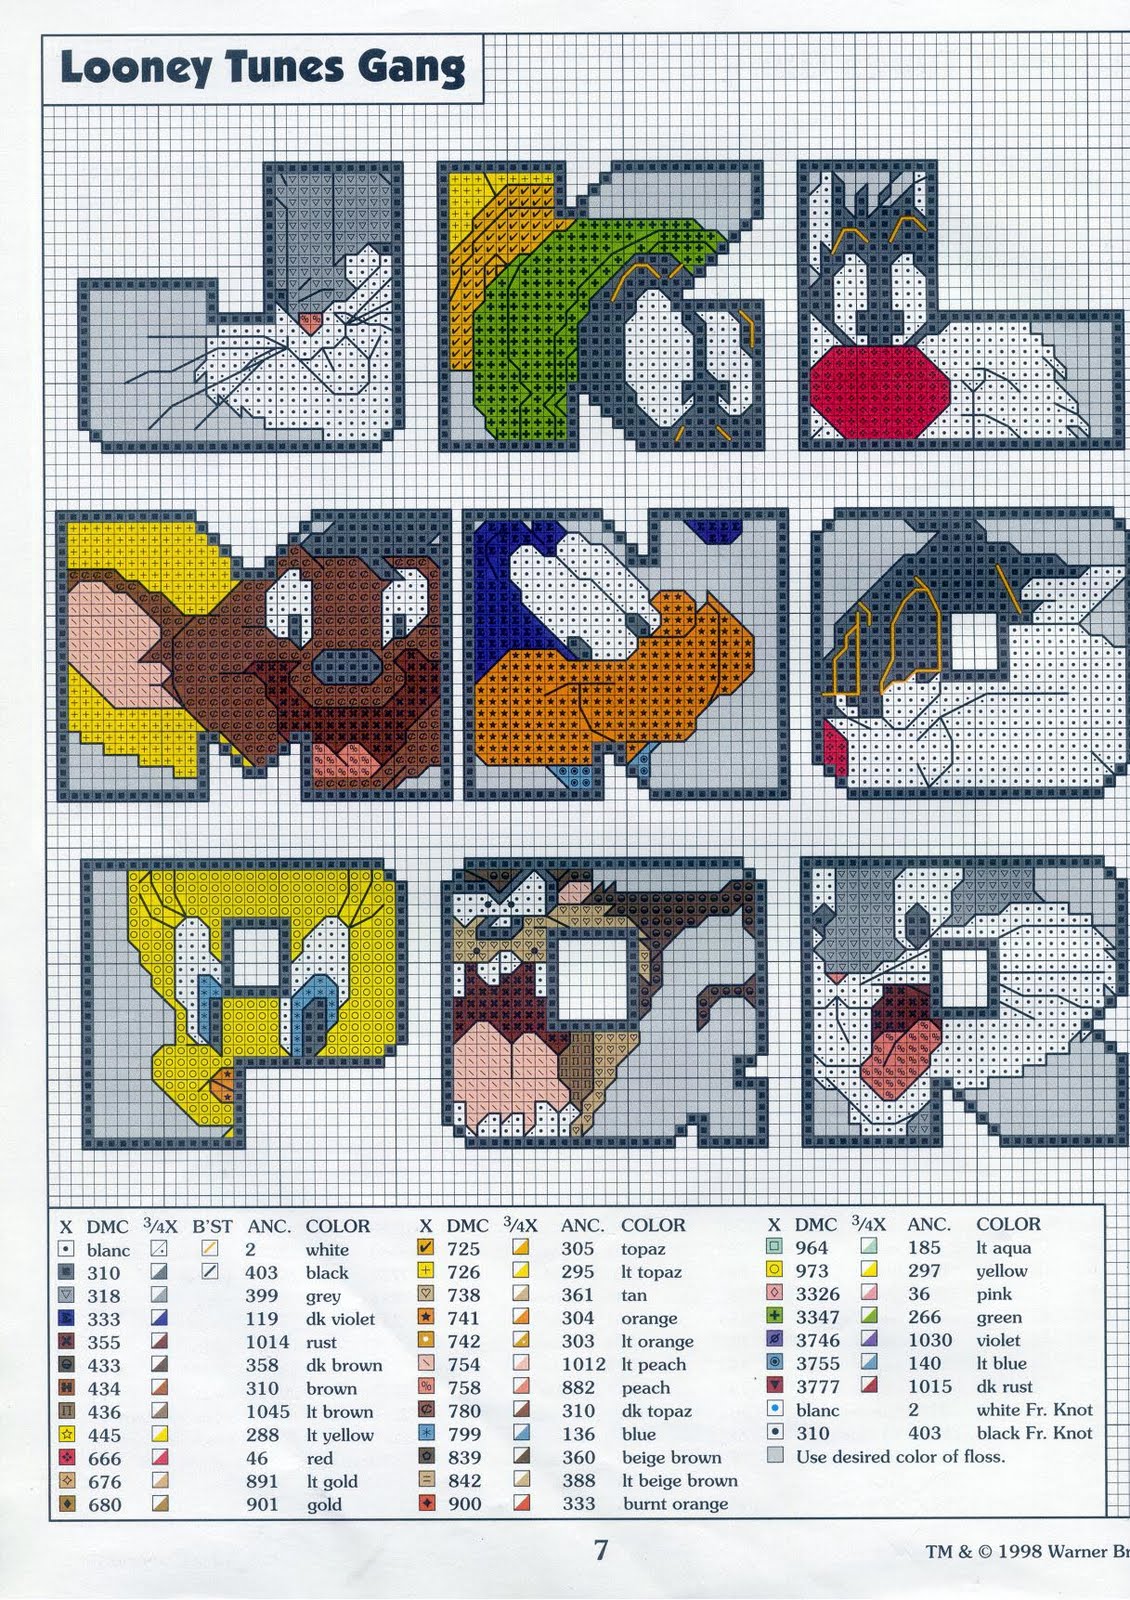 Cross stitch alphabet with Looney Tunes characters very cute (2)